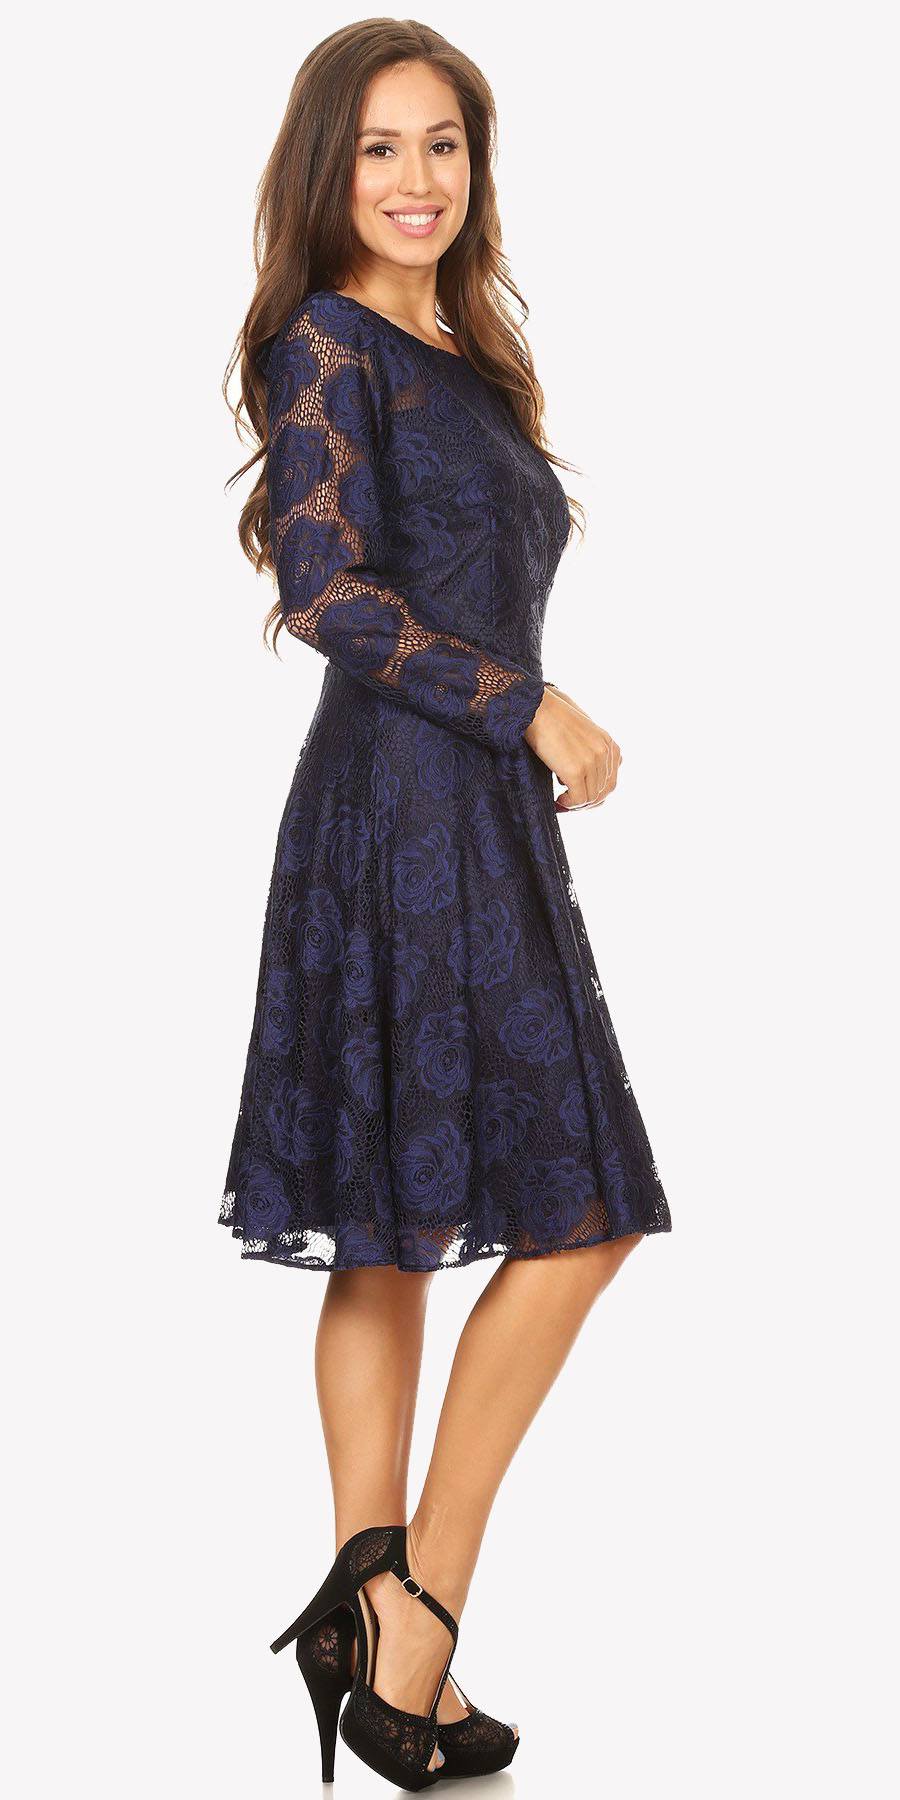 Long sleeve dresses for wedding guests list